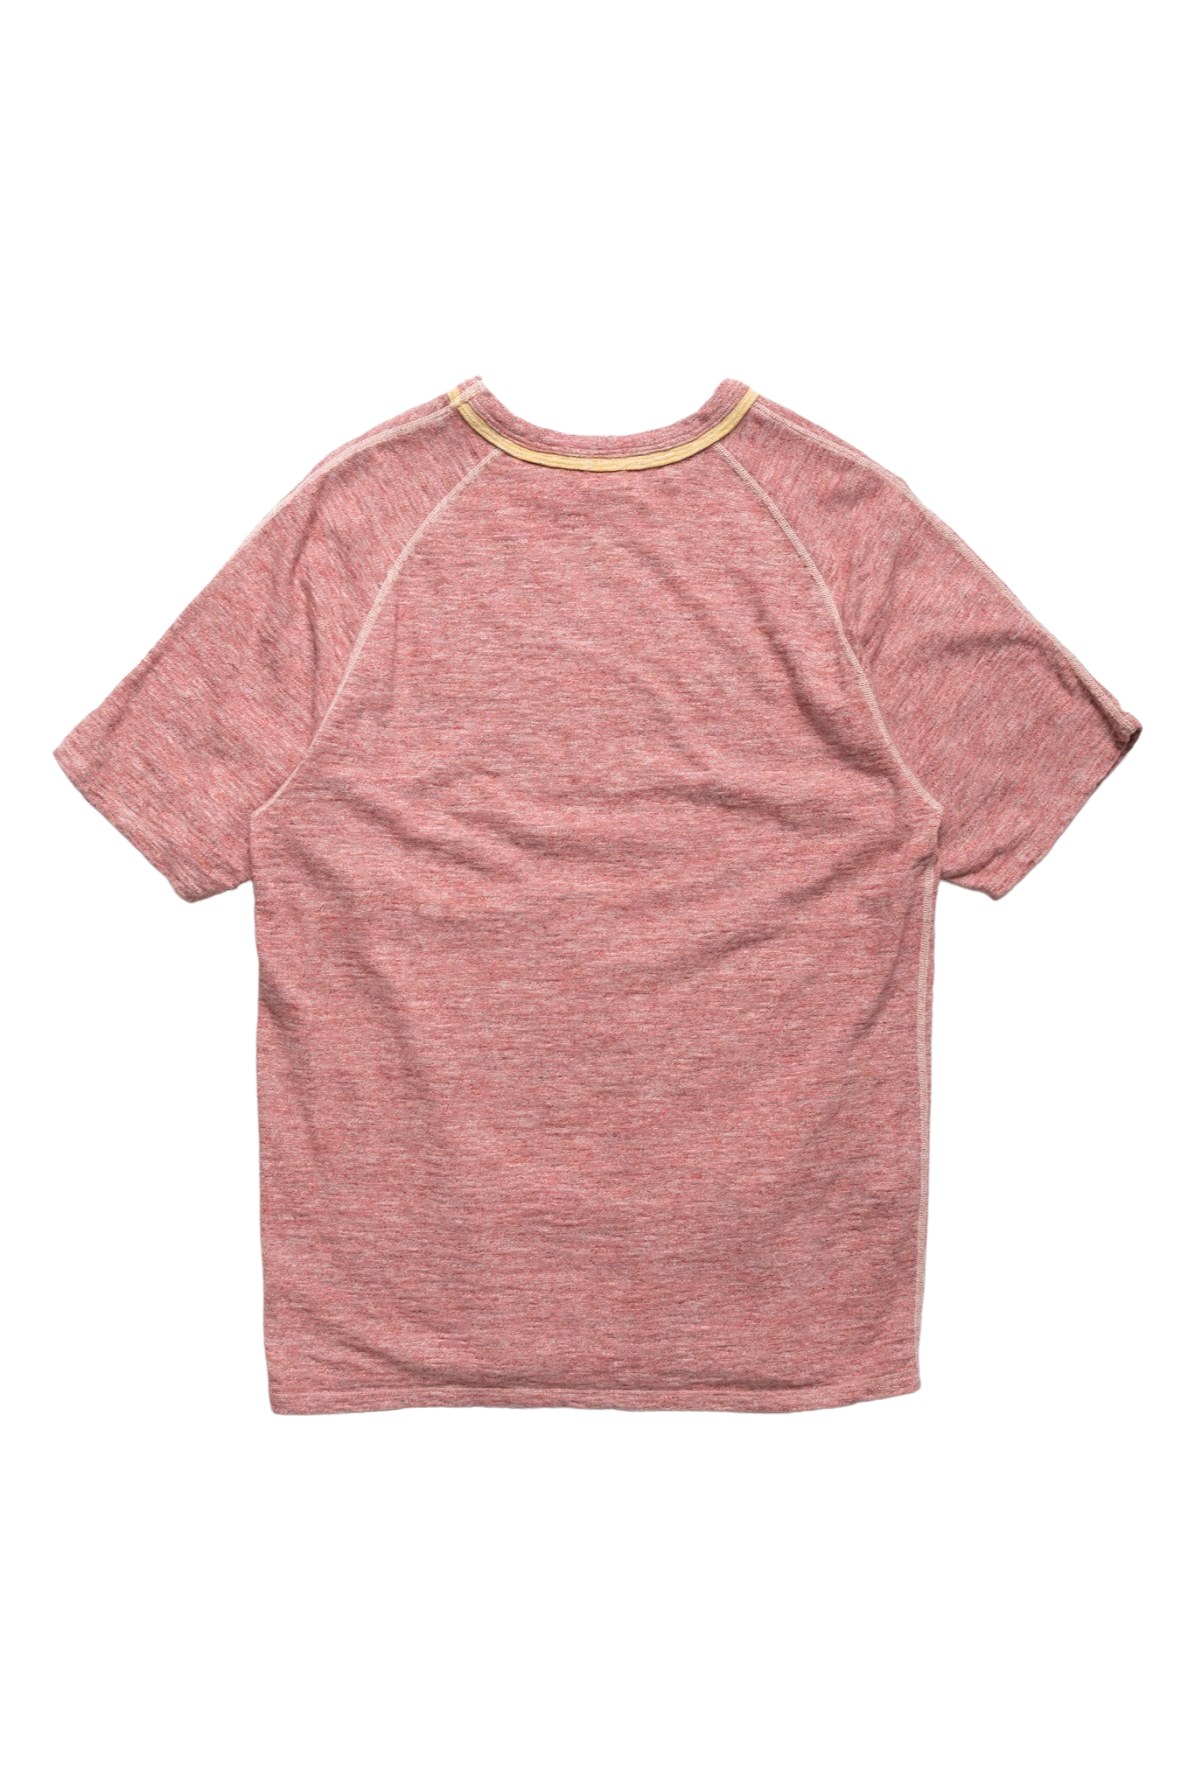 From Loop & Weft is an uneven heather slub knit. Vintage Inspired Double binder neck Set-in on the front and raglan sleeve on the back. Cotton thread stitching. Color: Red Cherry. One wash. Unisex regular fit. 100% cotton. Made in Japan